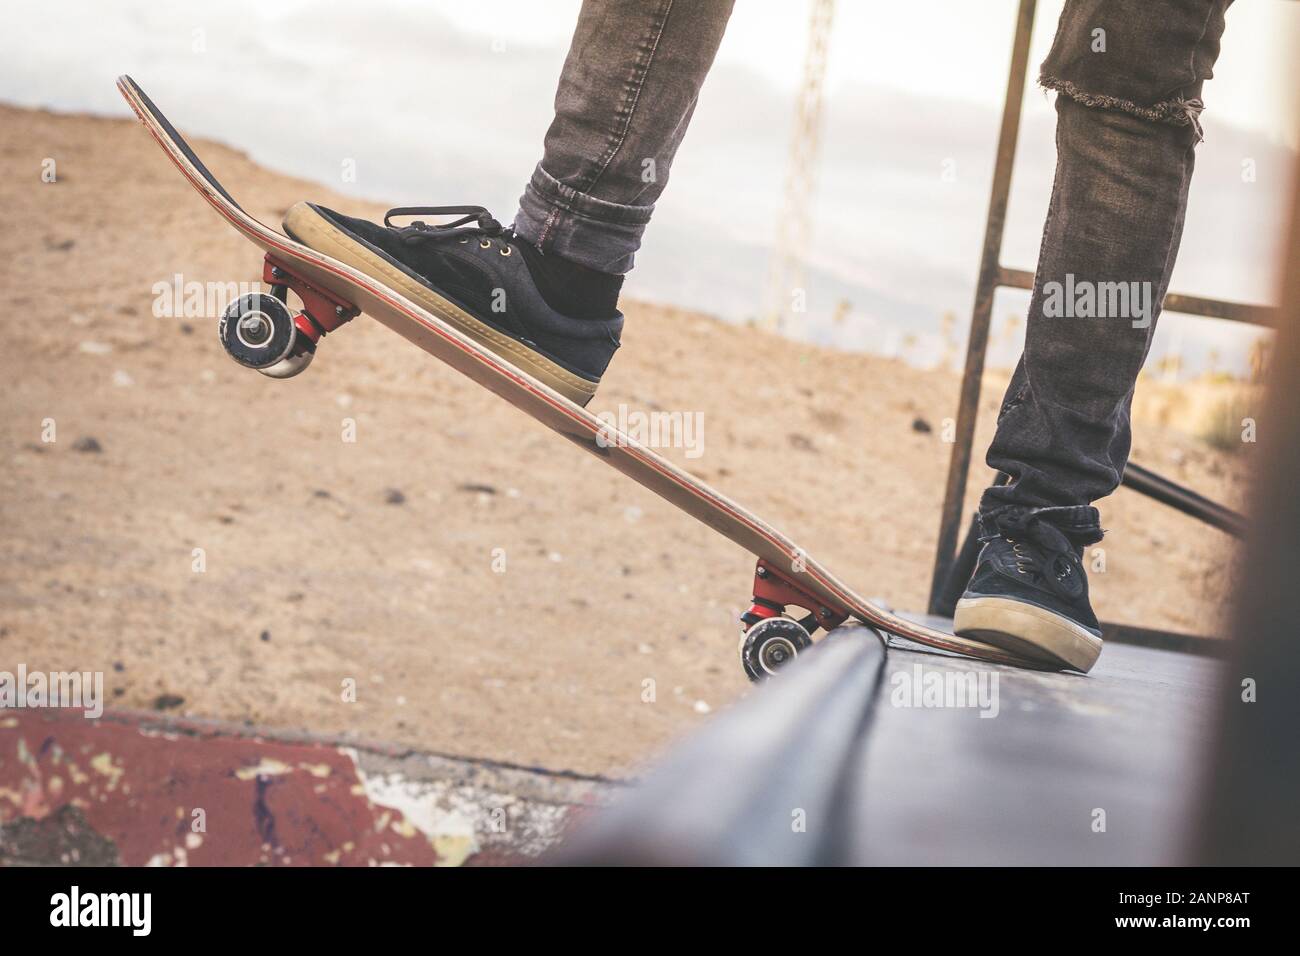 Close up view of teen's feet on a skateboard ready to start a ride over the